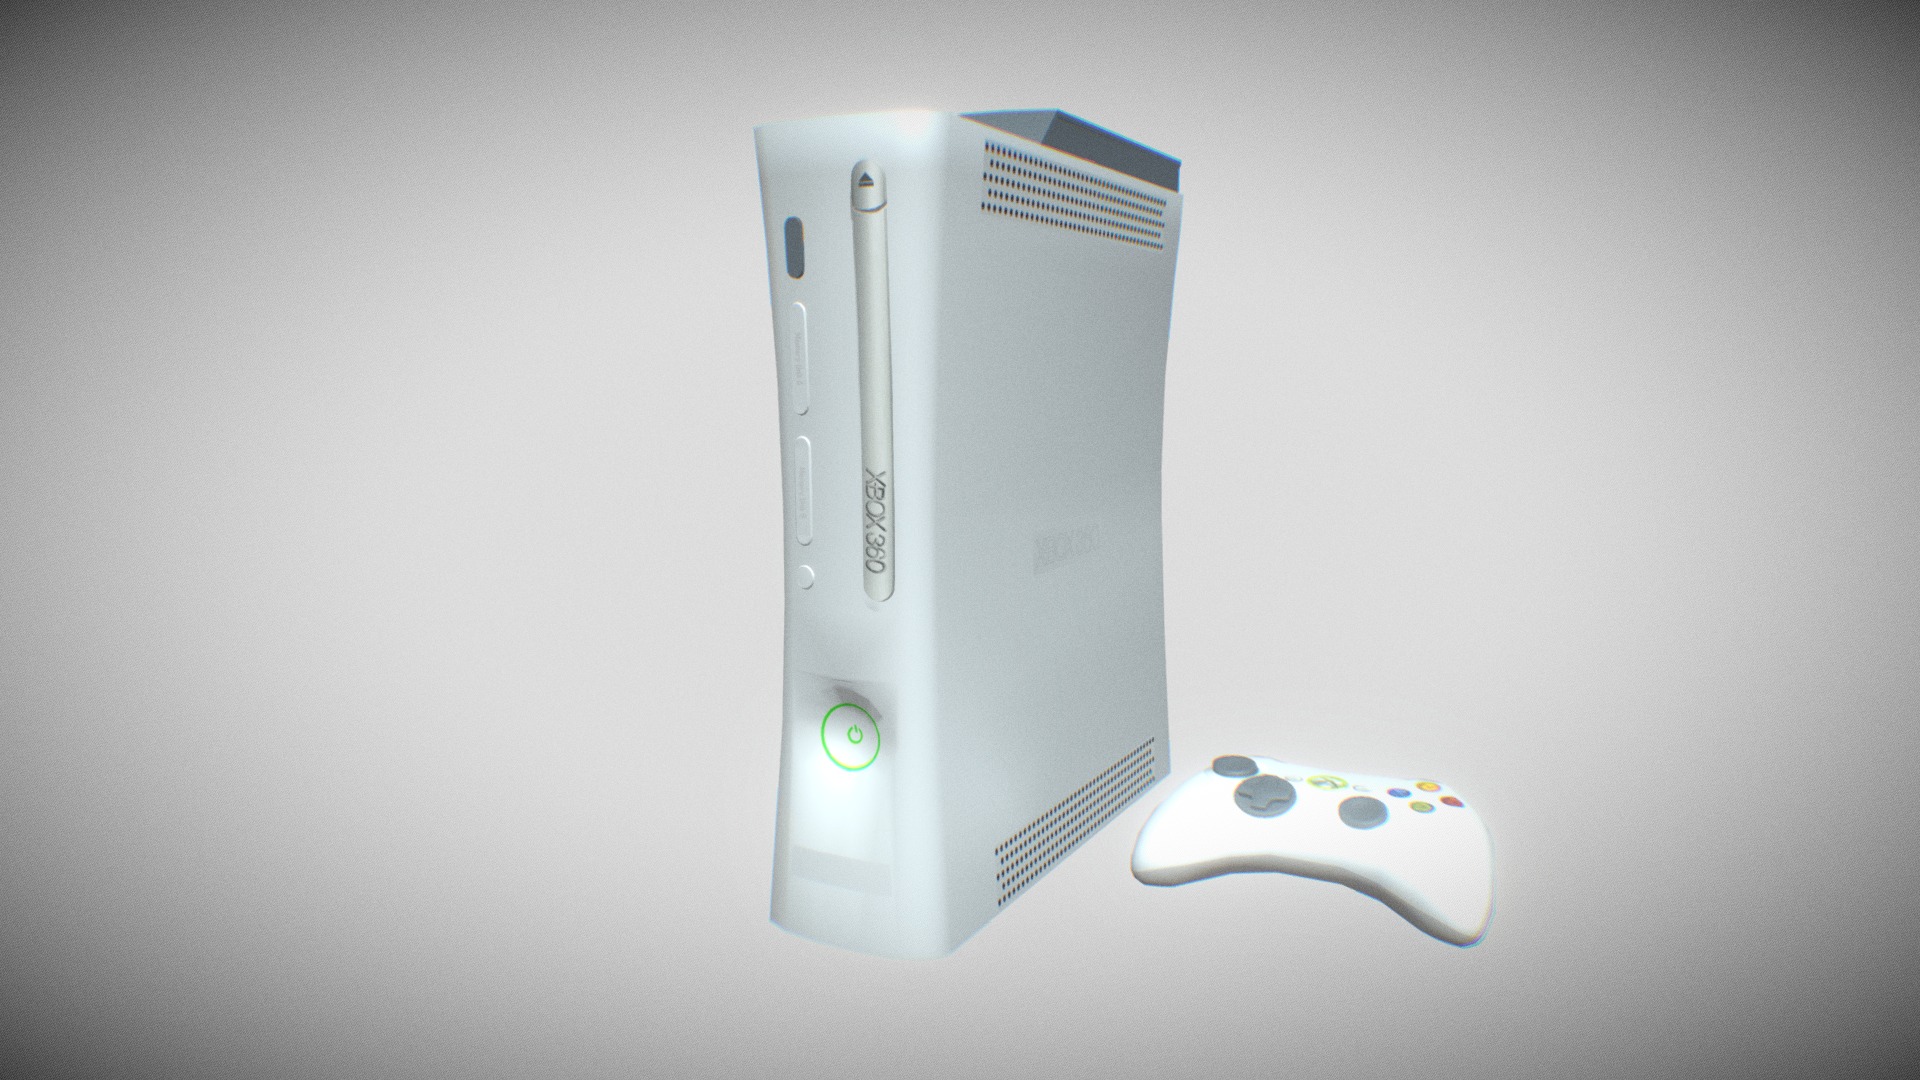 3D model X Box - This is a 3D model of the X Box. The 3D model is about a white video game console and controller.